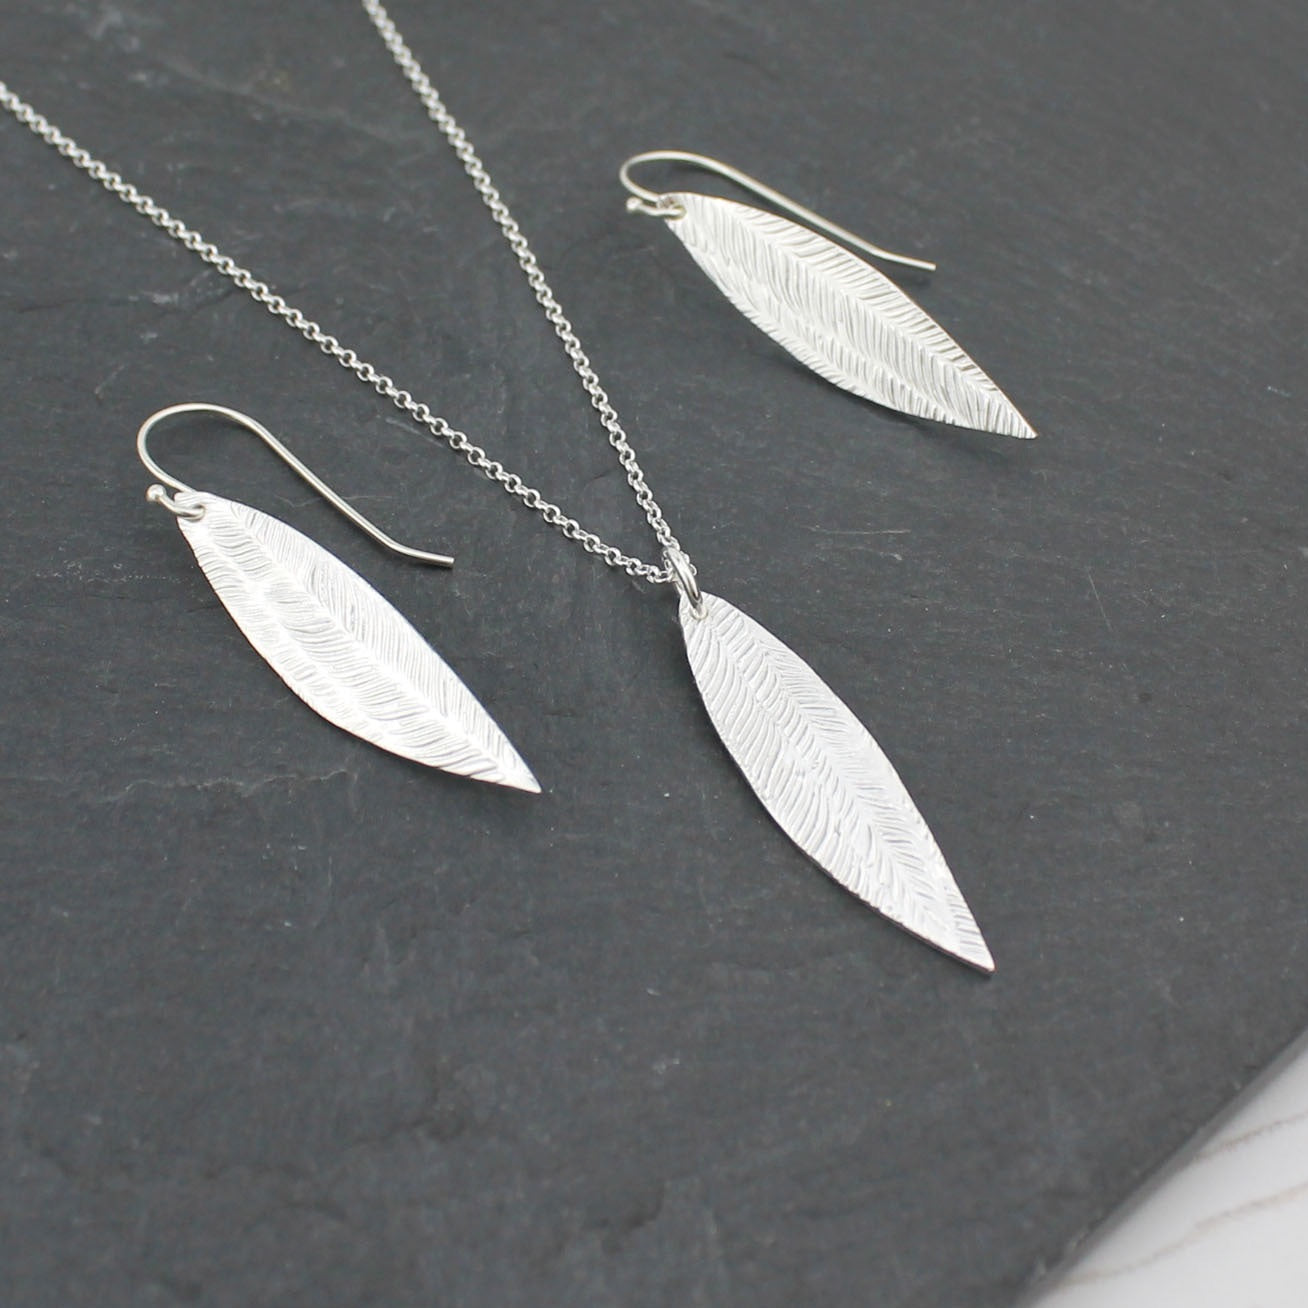 Handmade Sterling Silver Palm Pendant by Lucy kemp